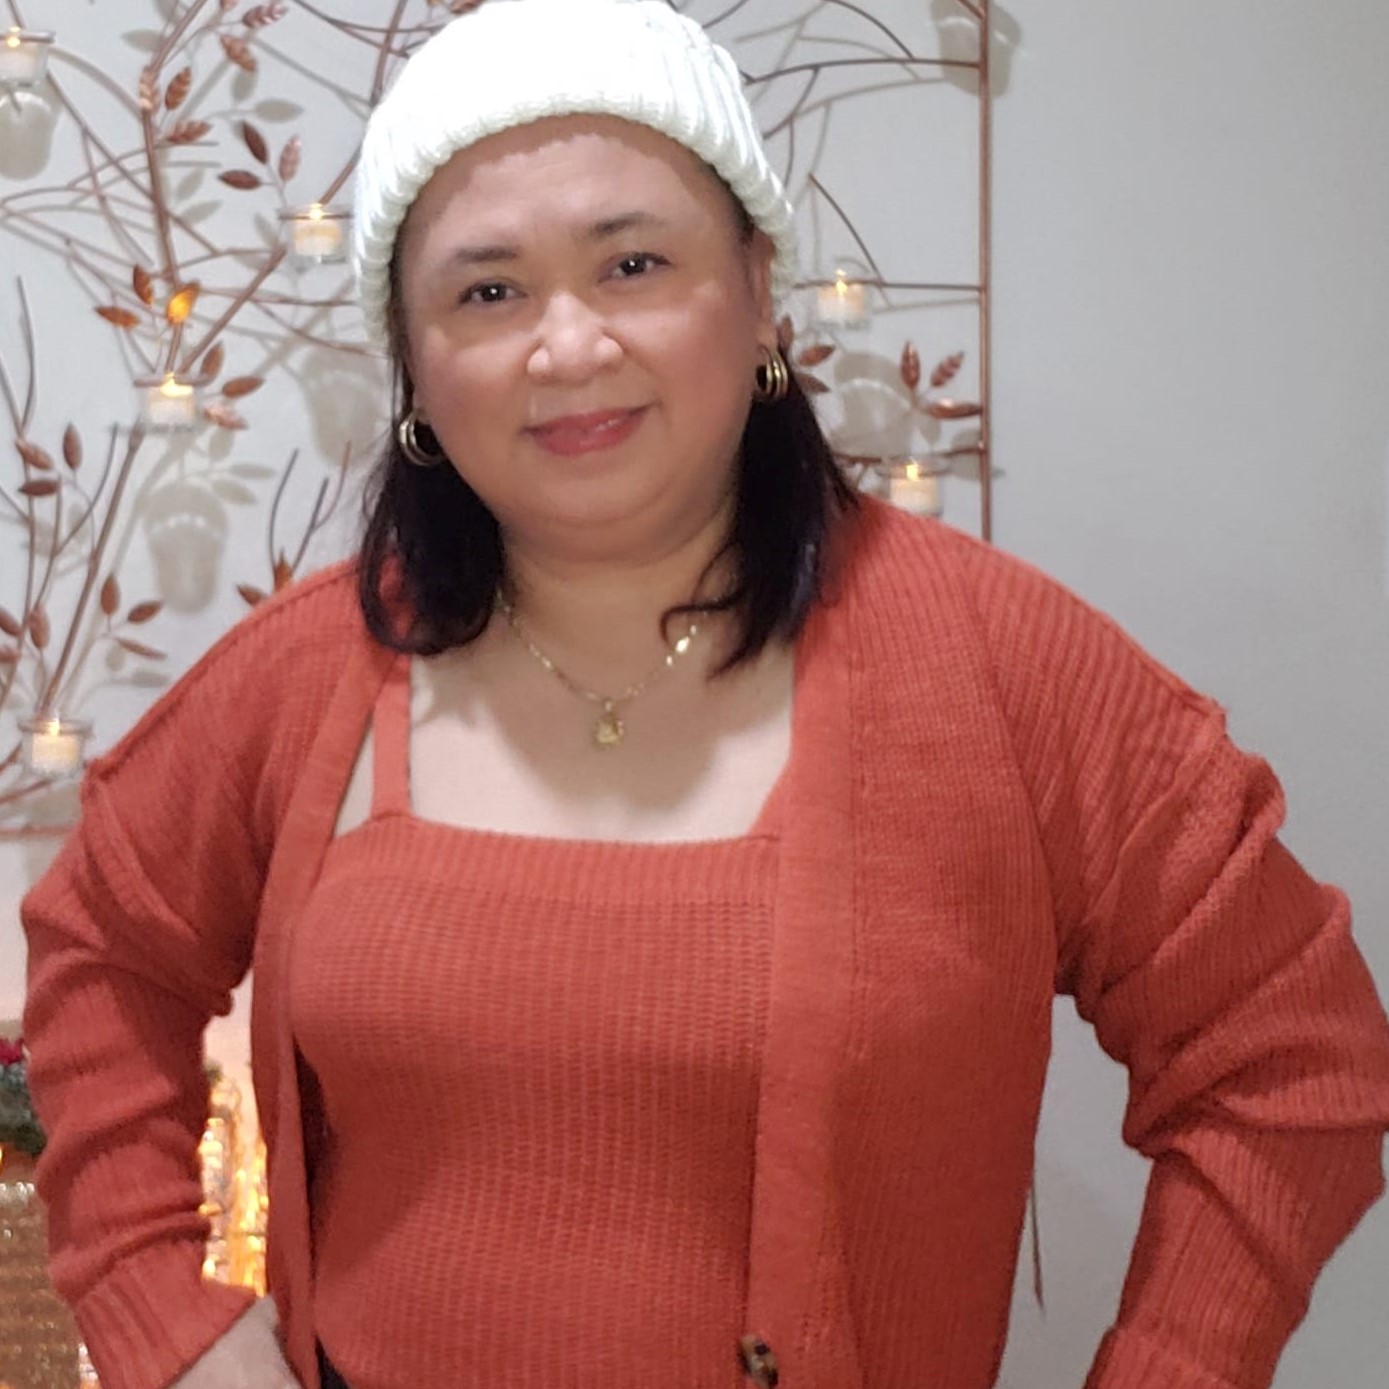 Woman is dressed in a stylish two piece outfit: a winter top, a cardigan, and a cute white hat